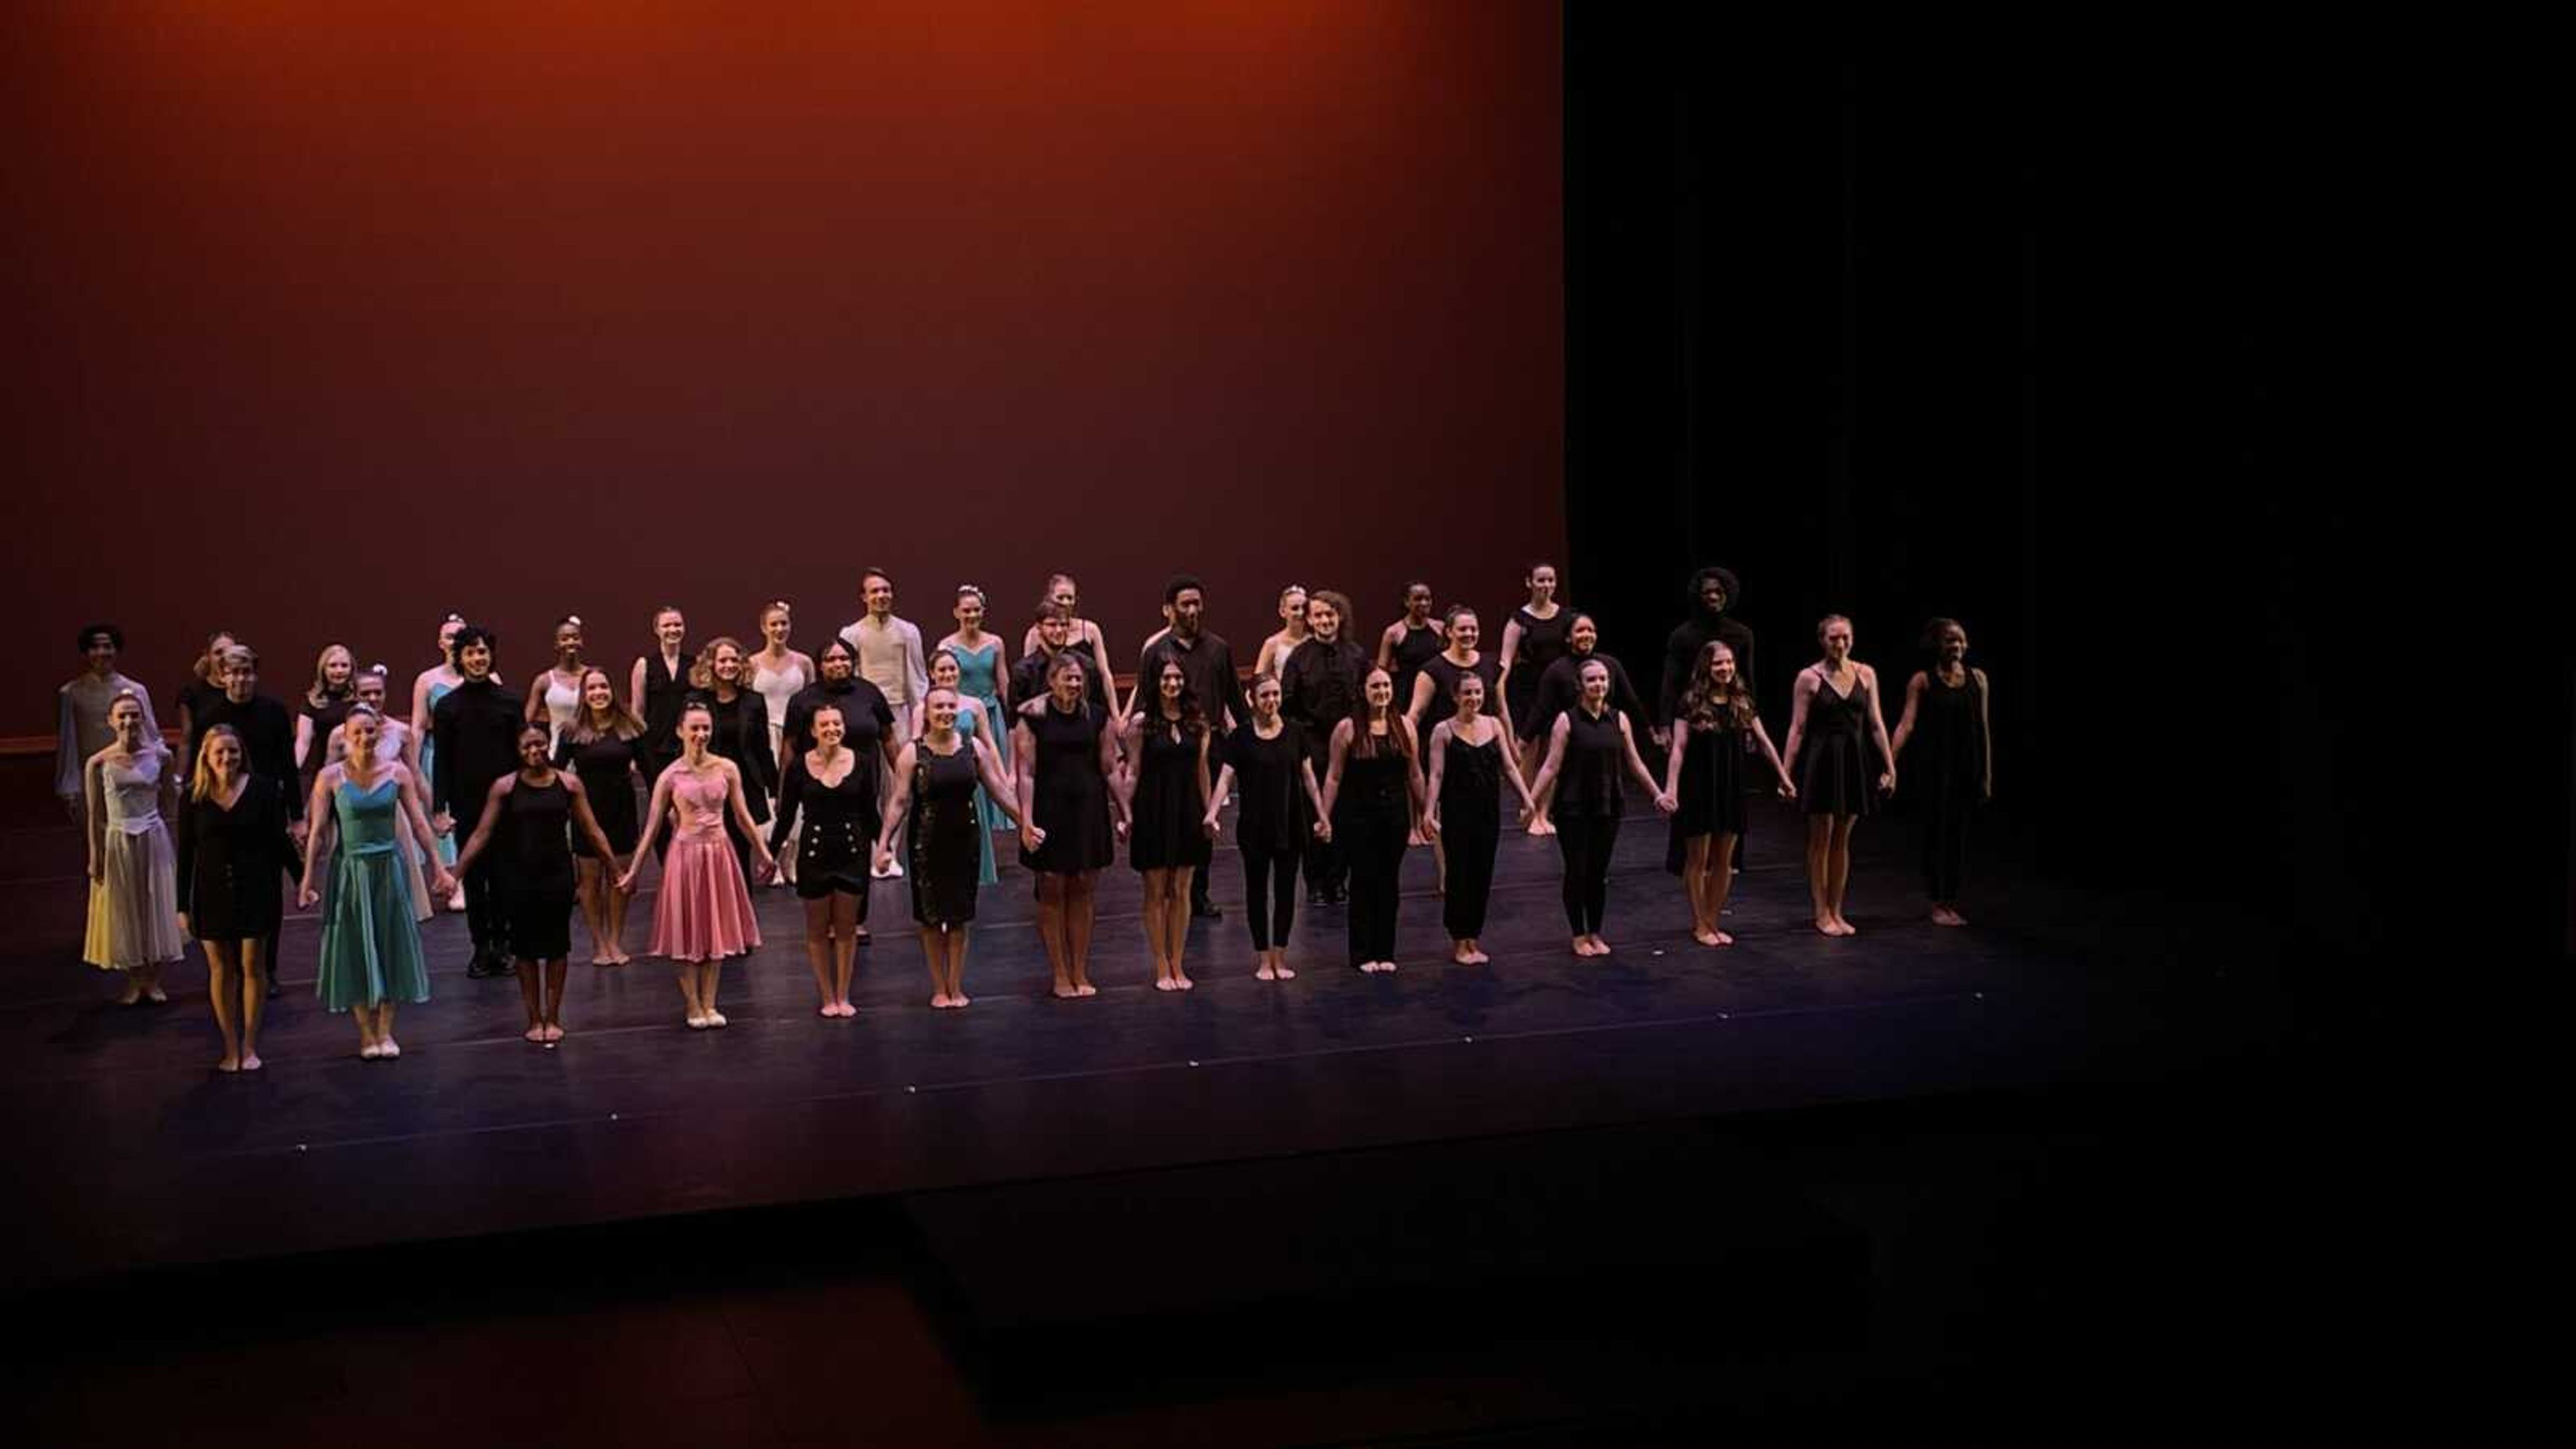 The dancers from Spring into Dance stand as the audience applauds their performance. The performance opened at 7:30 p.m. on Thursday, April 7.